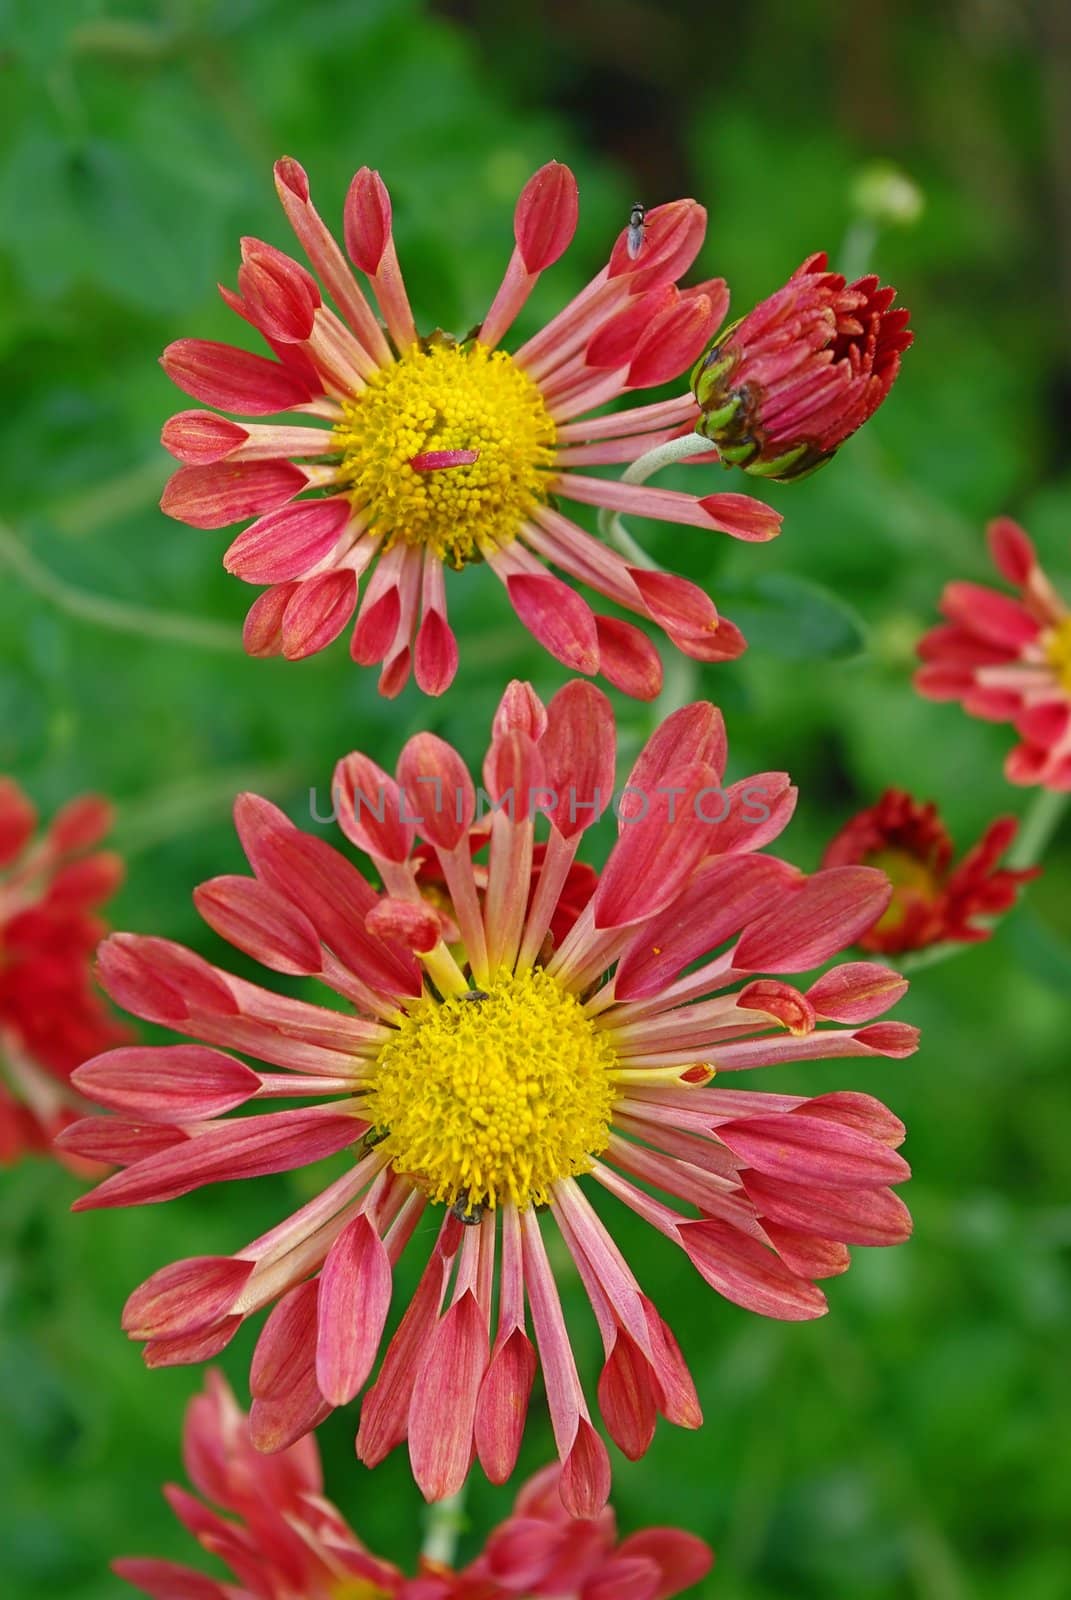 Unique variety of red-brown chrysanthemums has tubular petals.